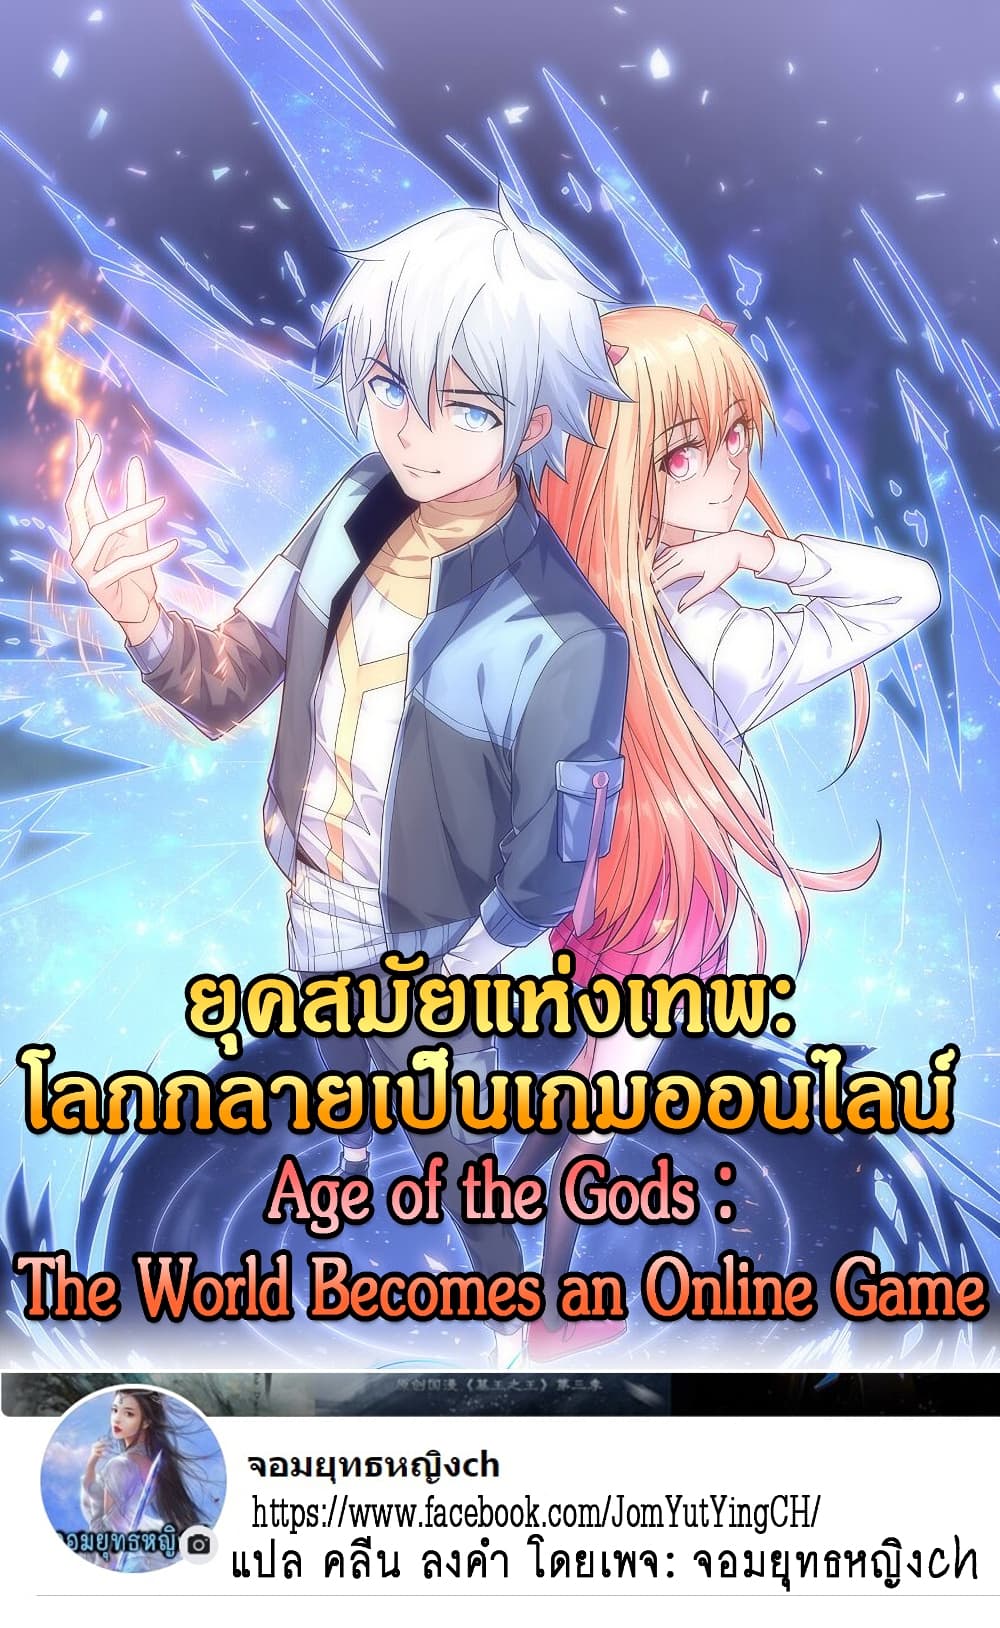 Age of the Gods: The World Becomes an Online Game 8-8